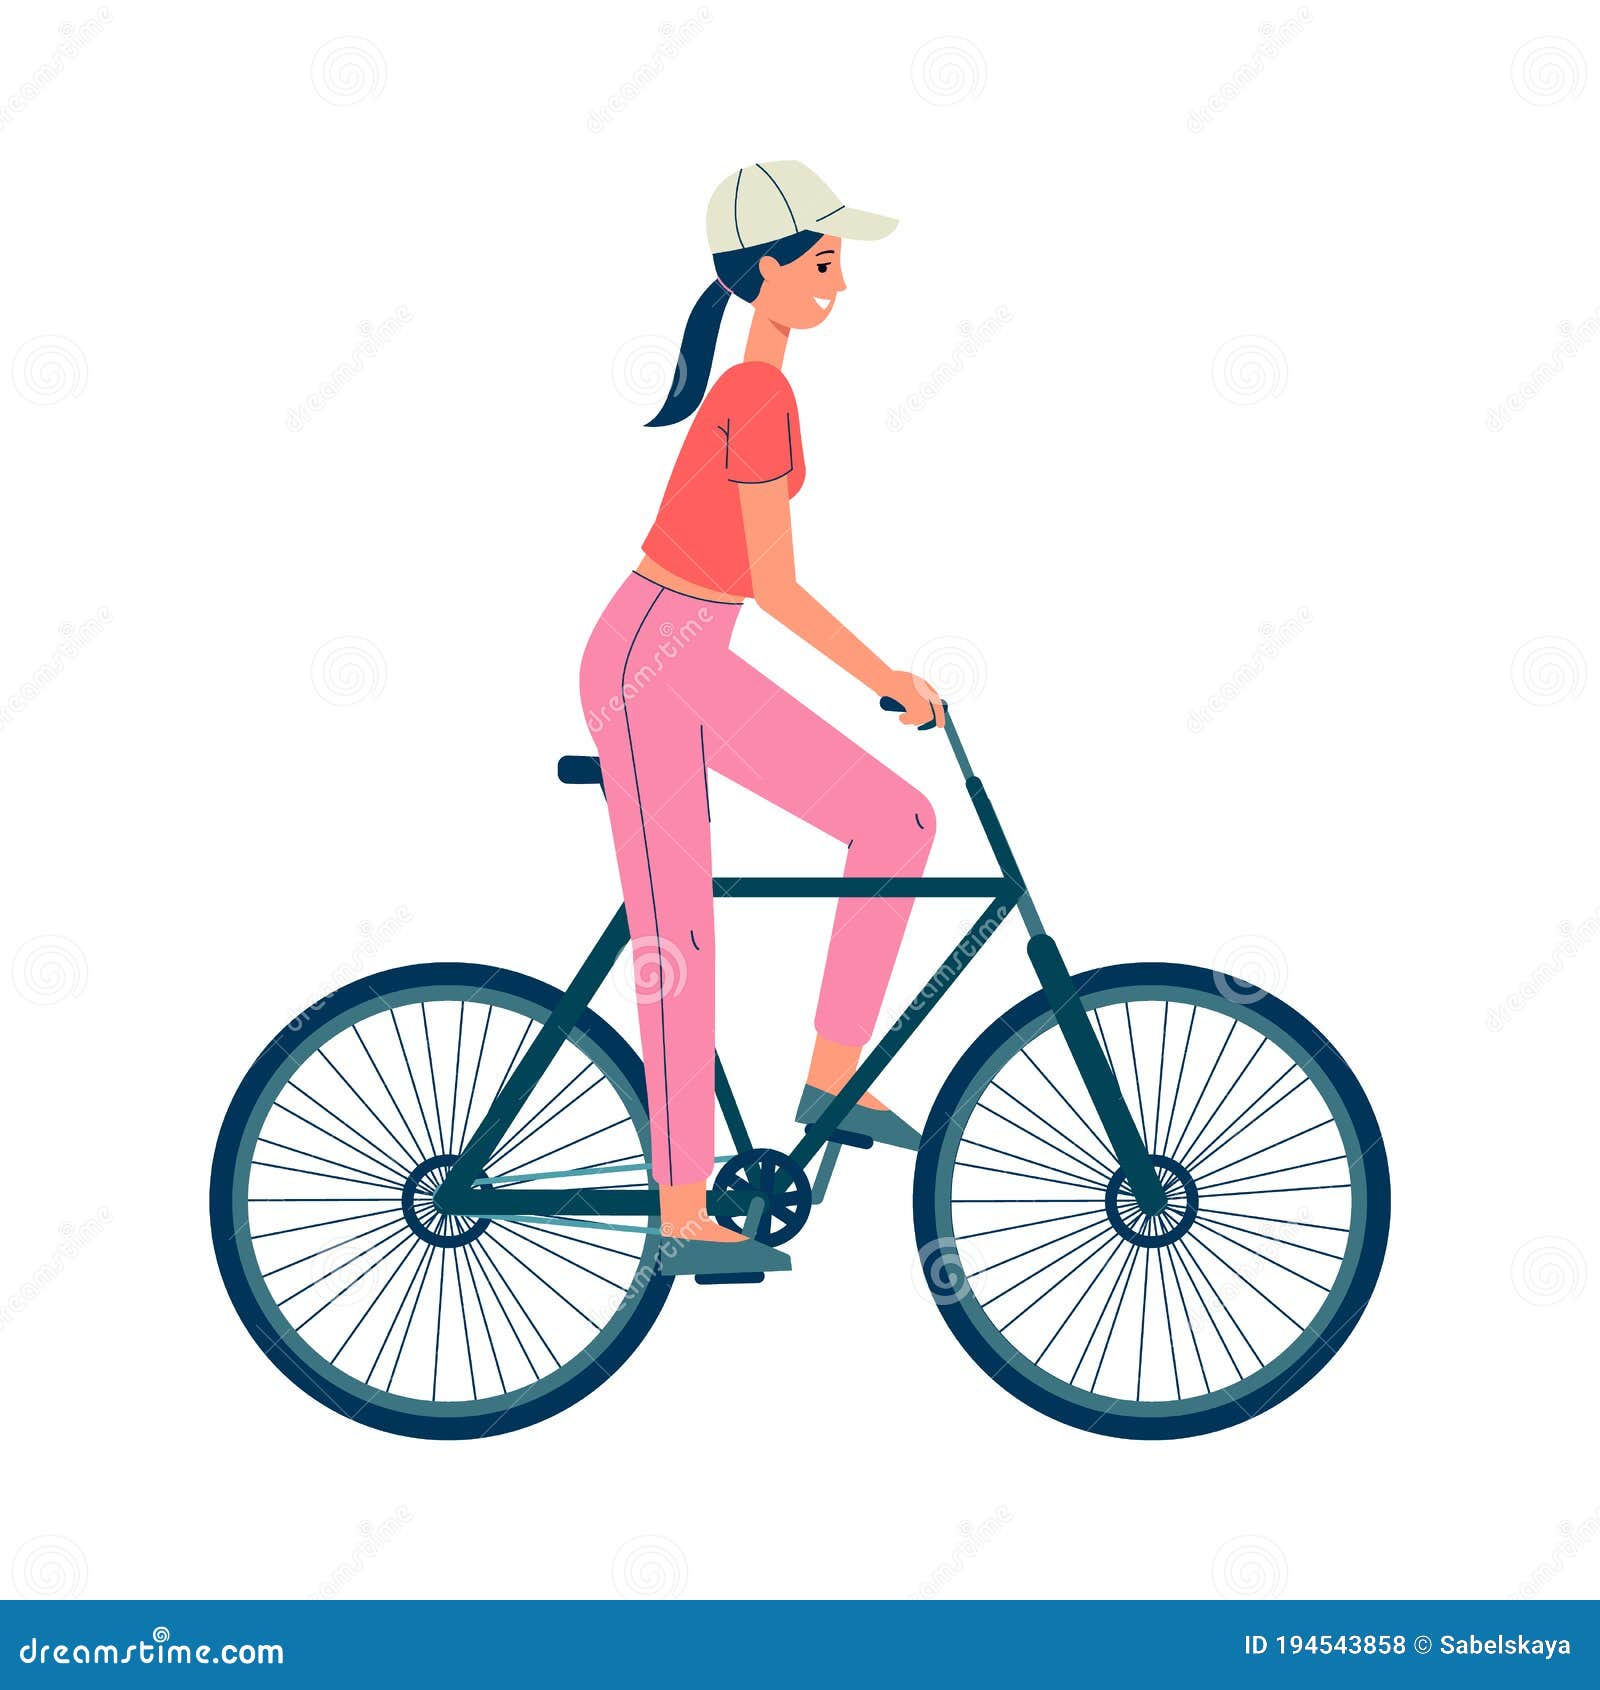 Cartoon Girl Riding a Bicycle and Smiling - Side View of Young Woman on a  Bike Stock Vector - Illustration of background, sitting: 194543858